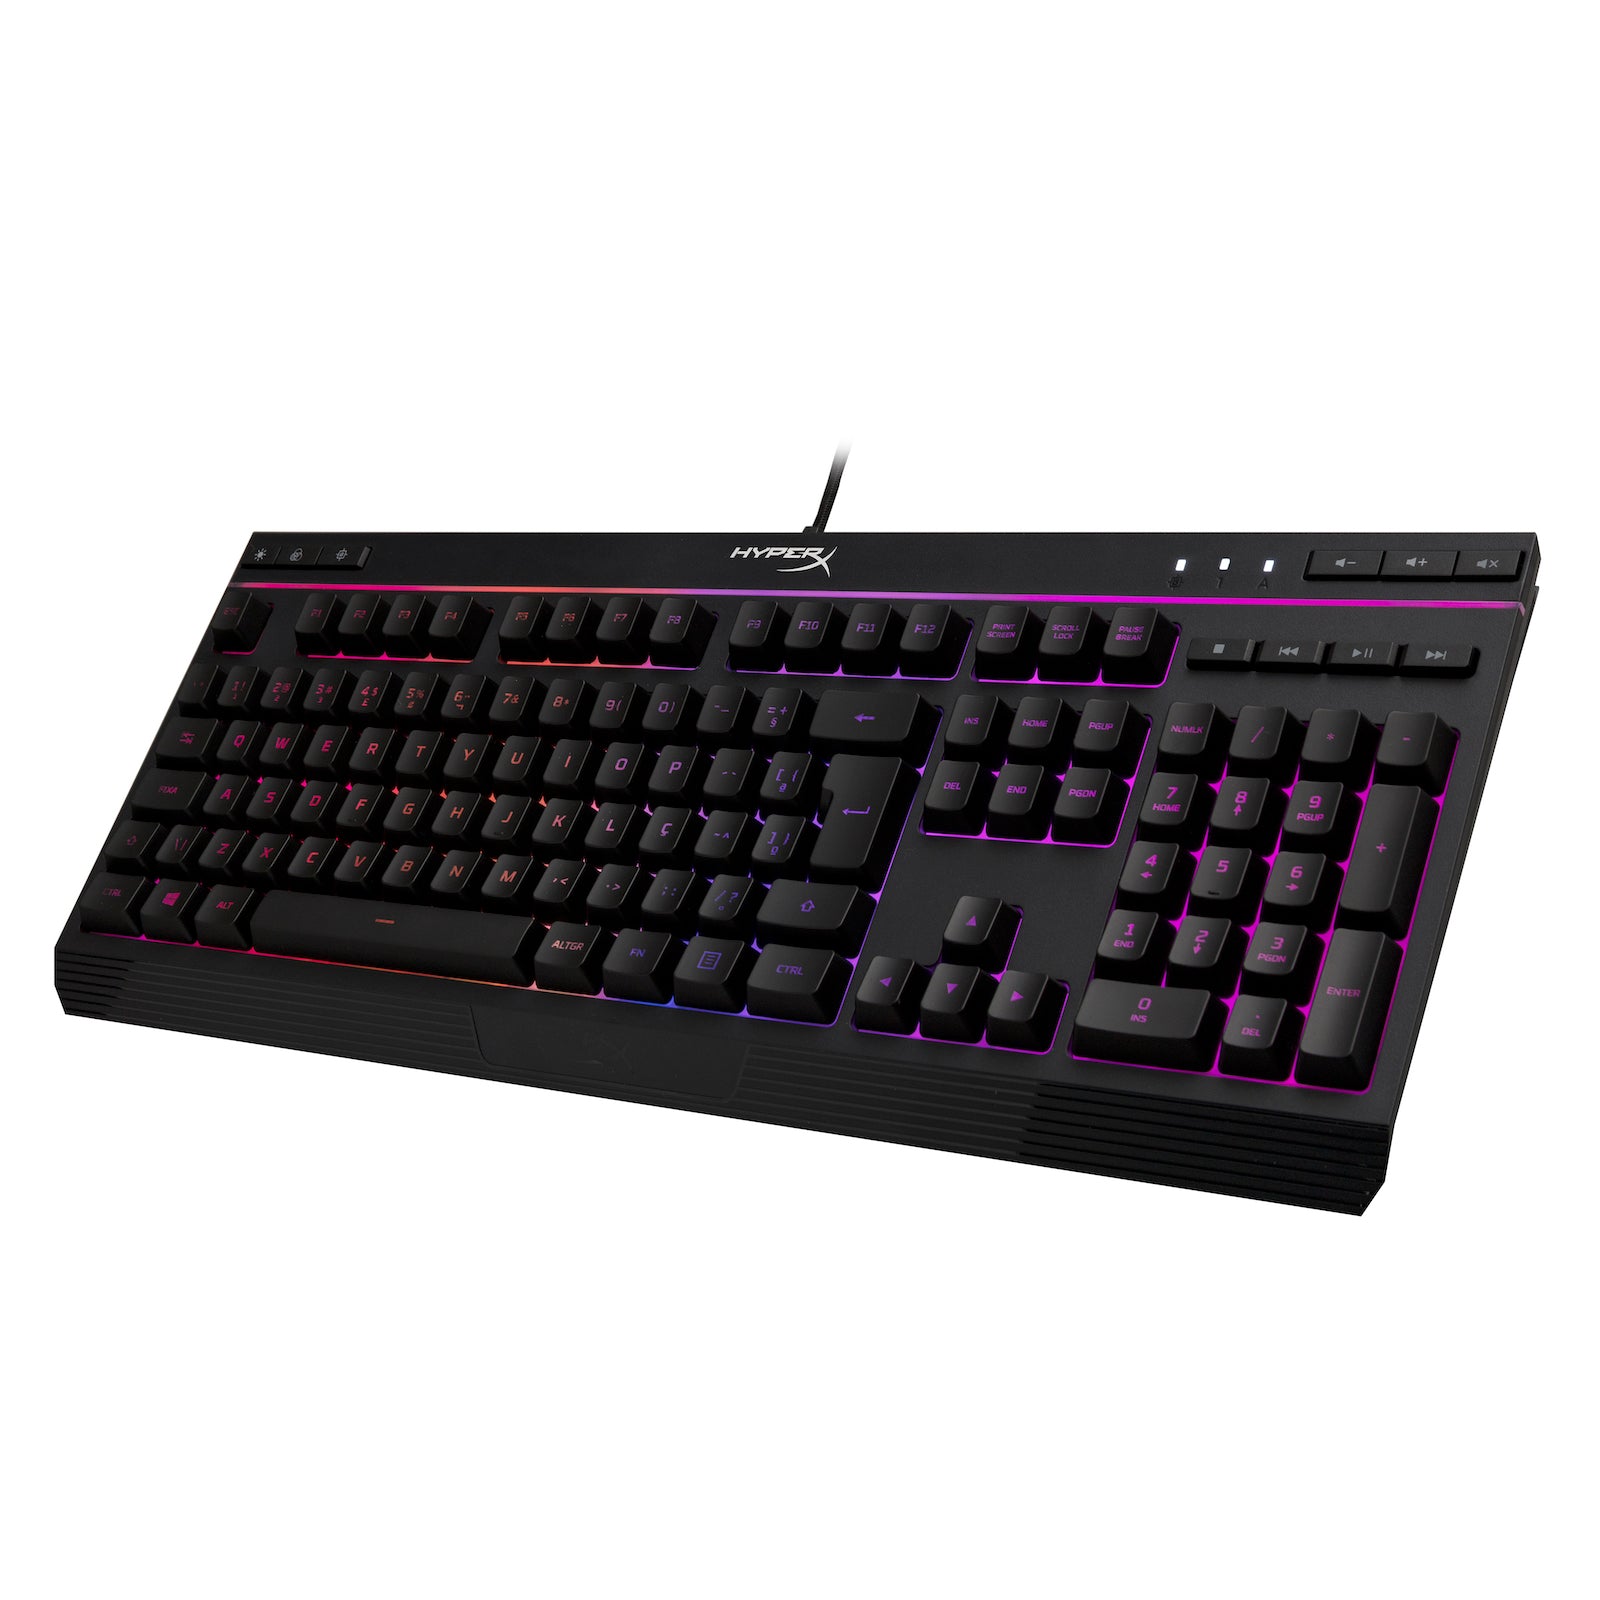 HyperX Alloy Core RGB gaming keyboard tilted to the left displaying Red and Purple RGB lighting effects